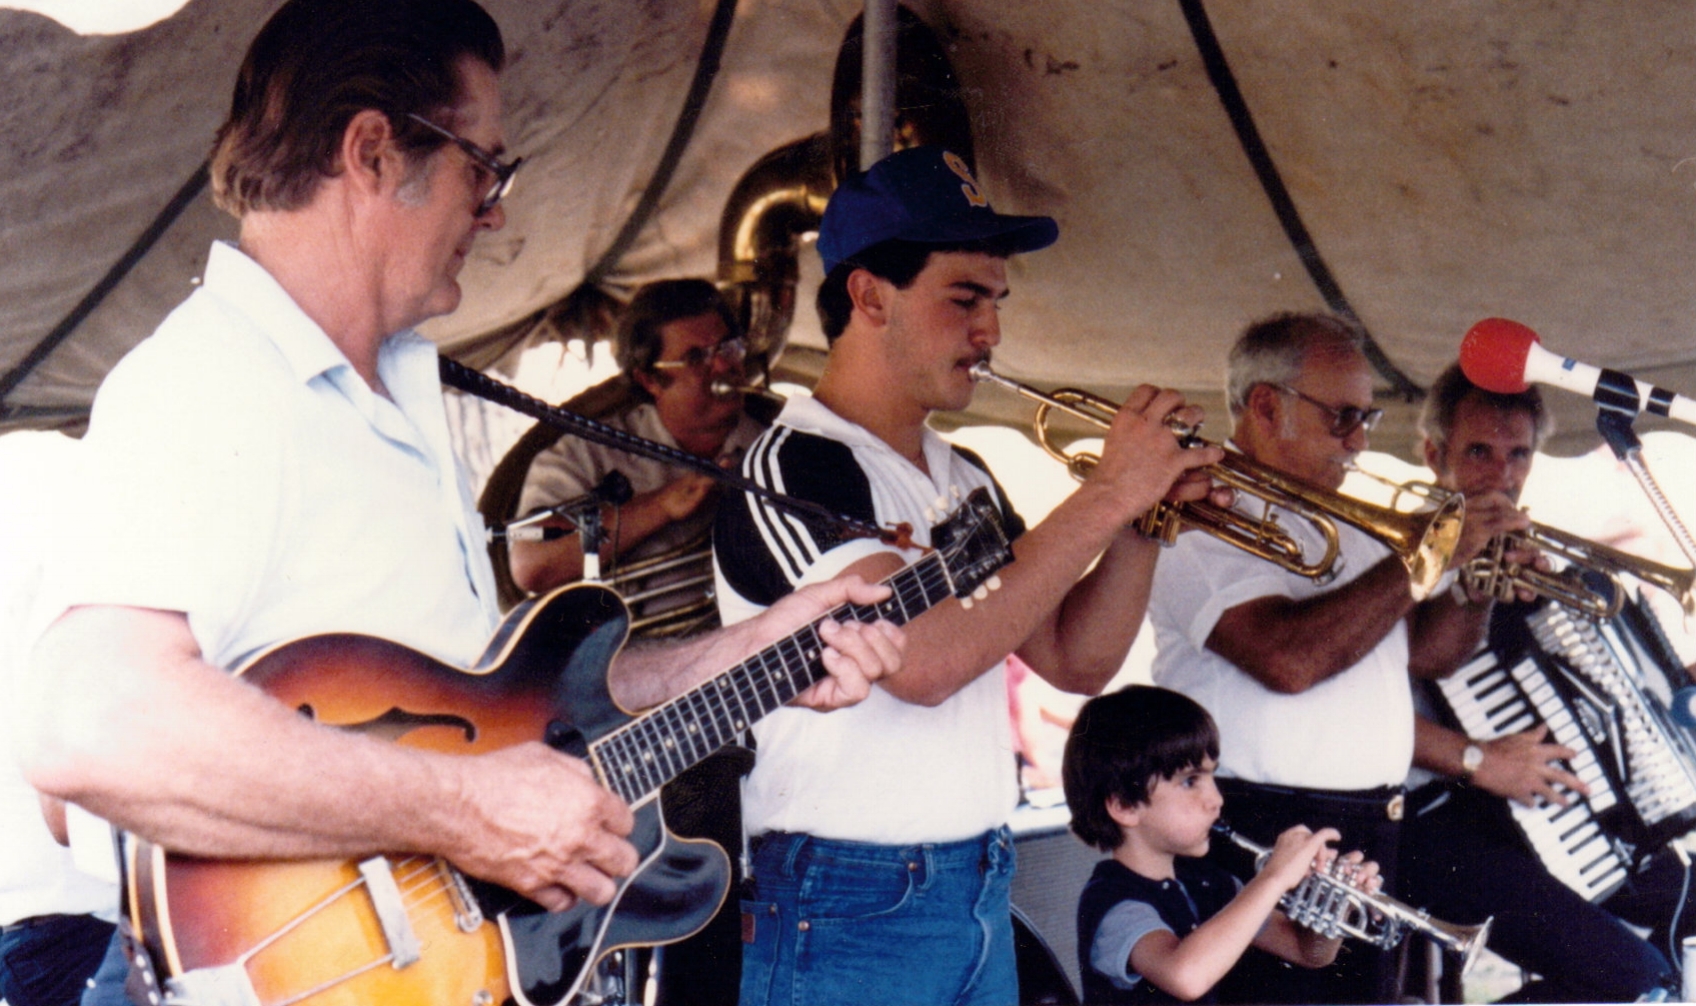 Playing in dad's band